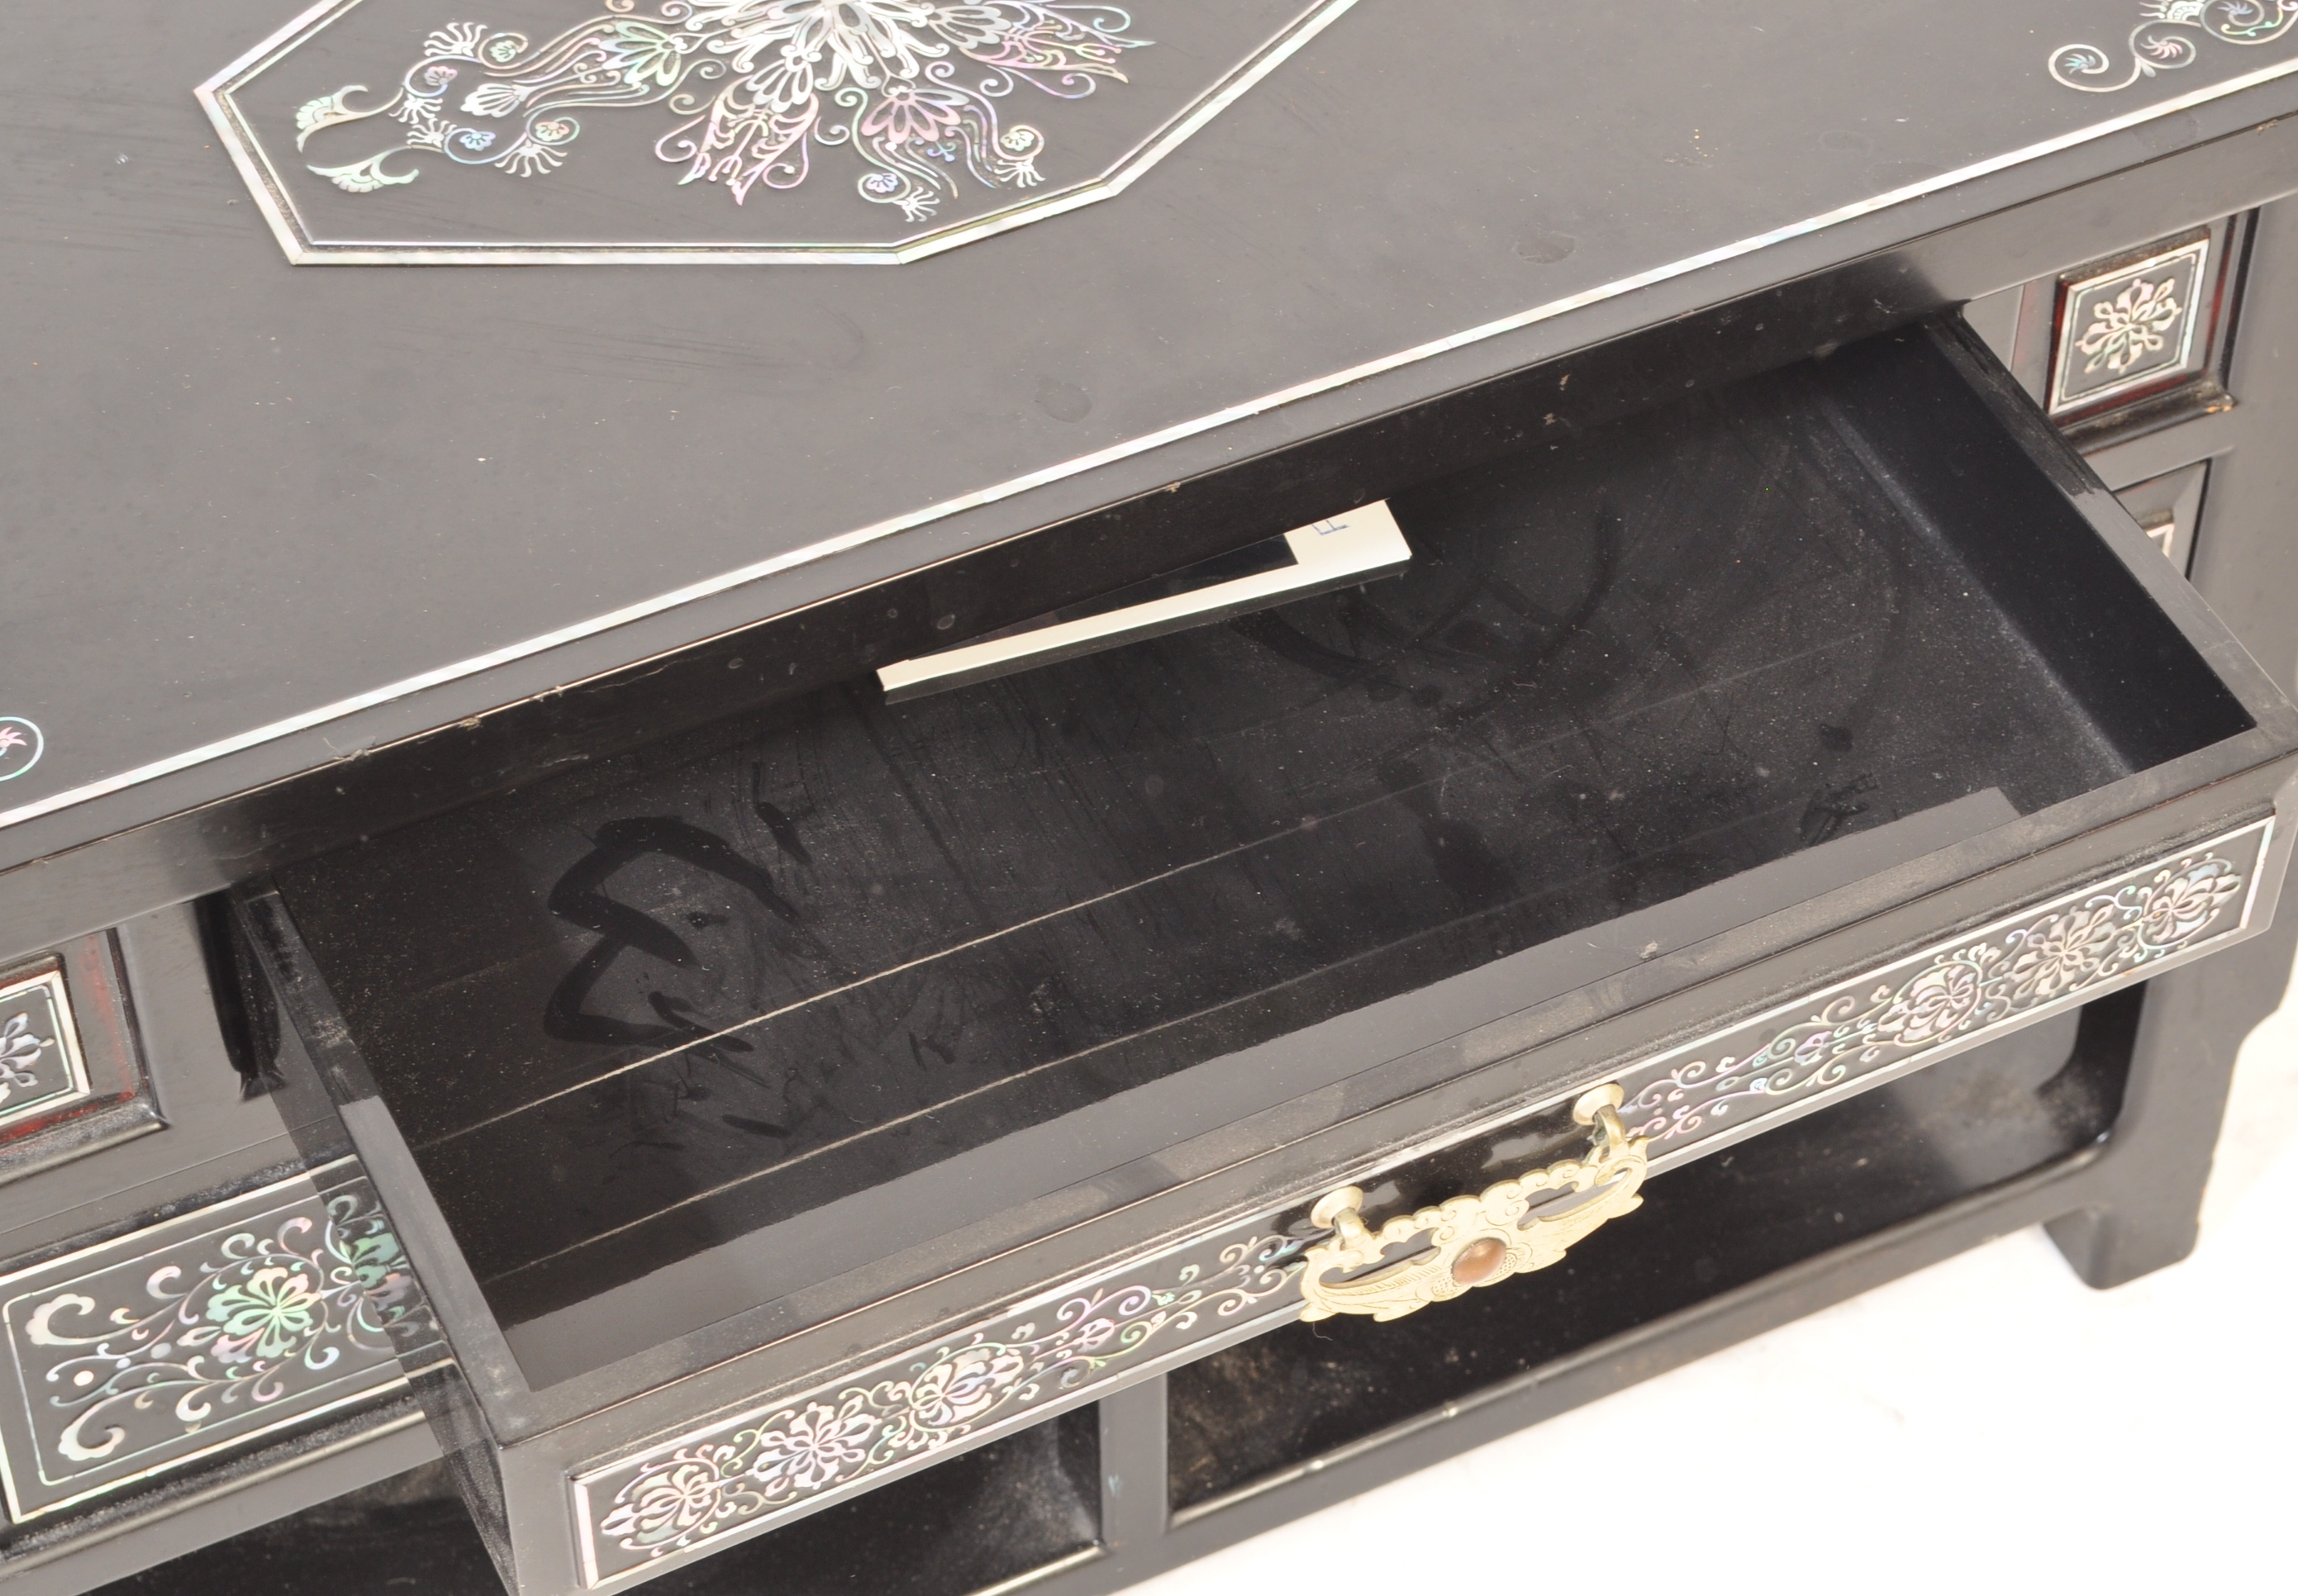 UNUSUAL JAPANESE BLACK LACQUER SIDE TABLE - Image 8 of 8